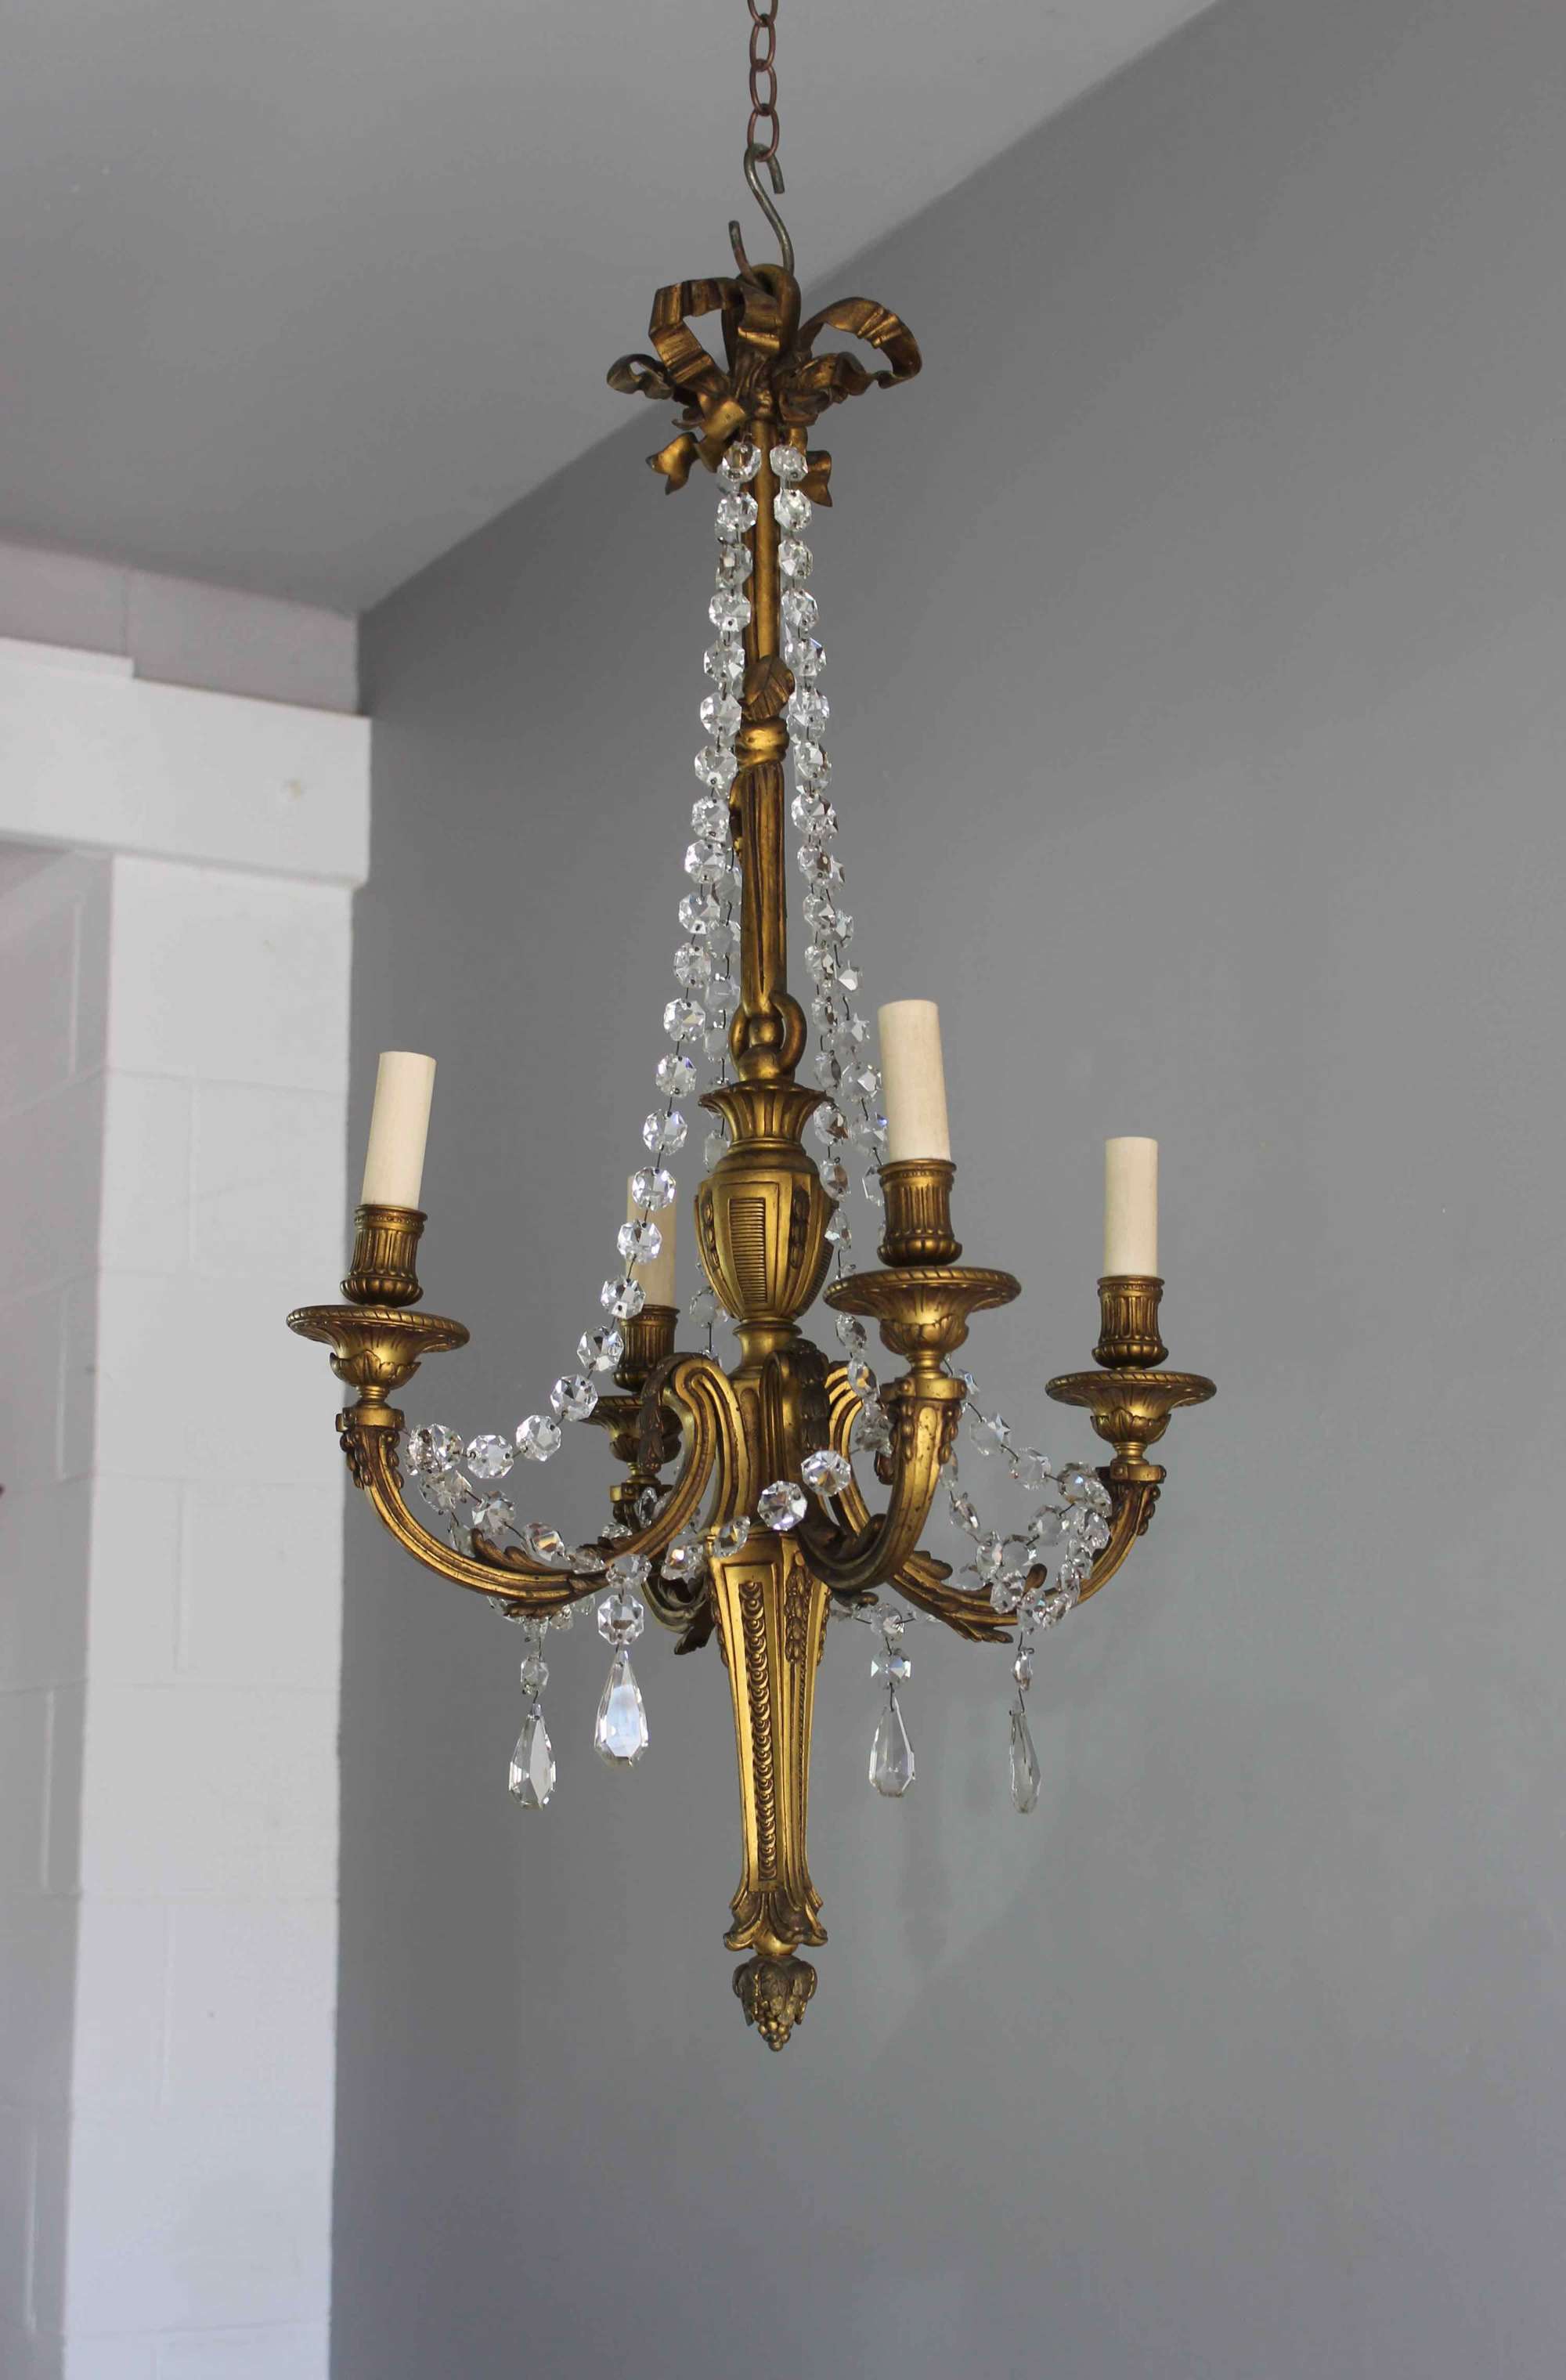 Traditional gilded brass library chandelier